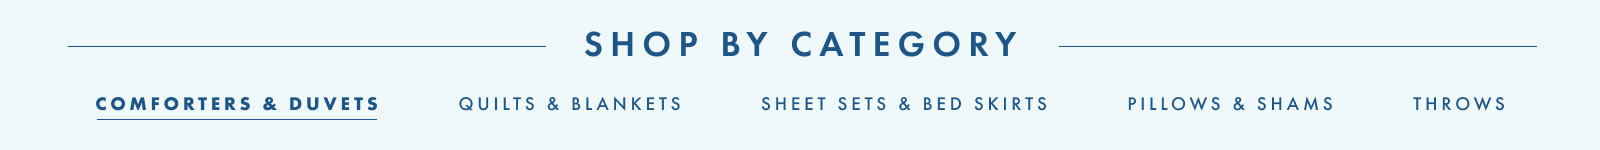 Shop By Category - Comforters, Quilts, Sheet Sets Pillows & Throws